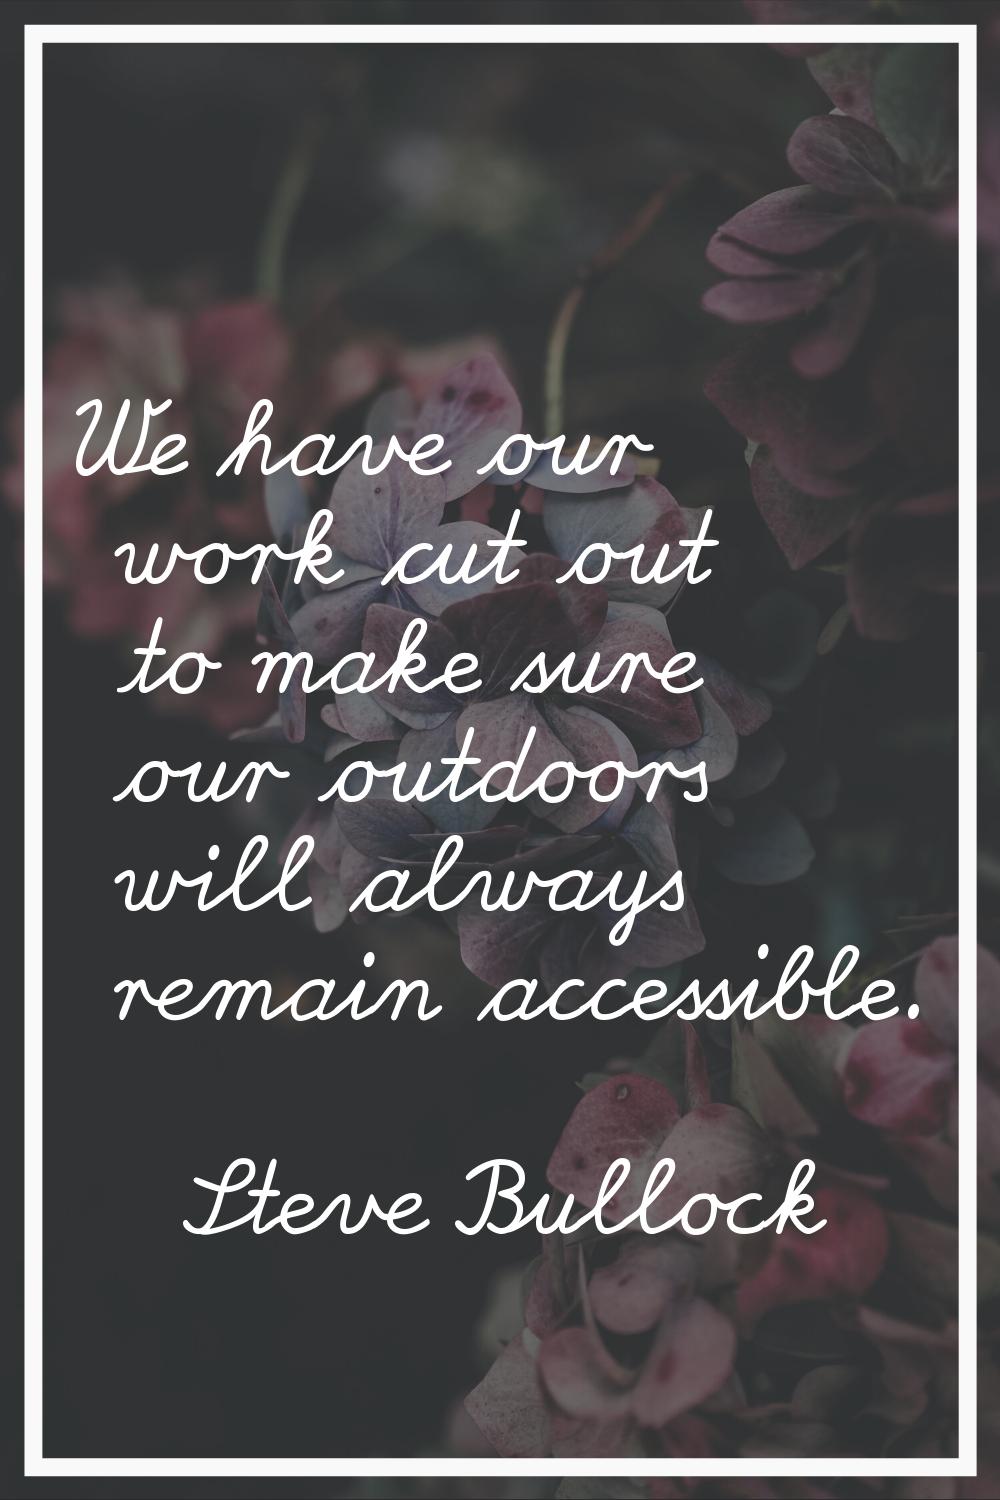 We have our work cut out to make sure our outdoors will always remain accessible.